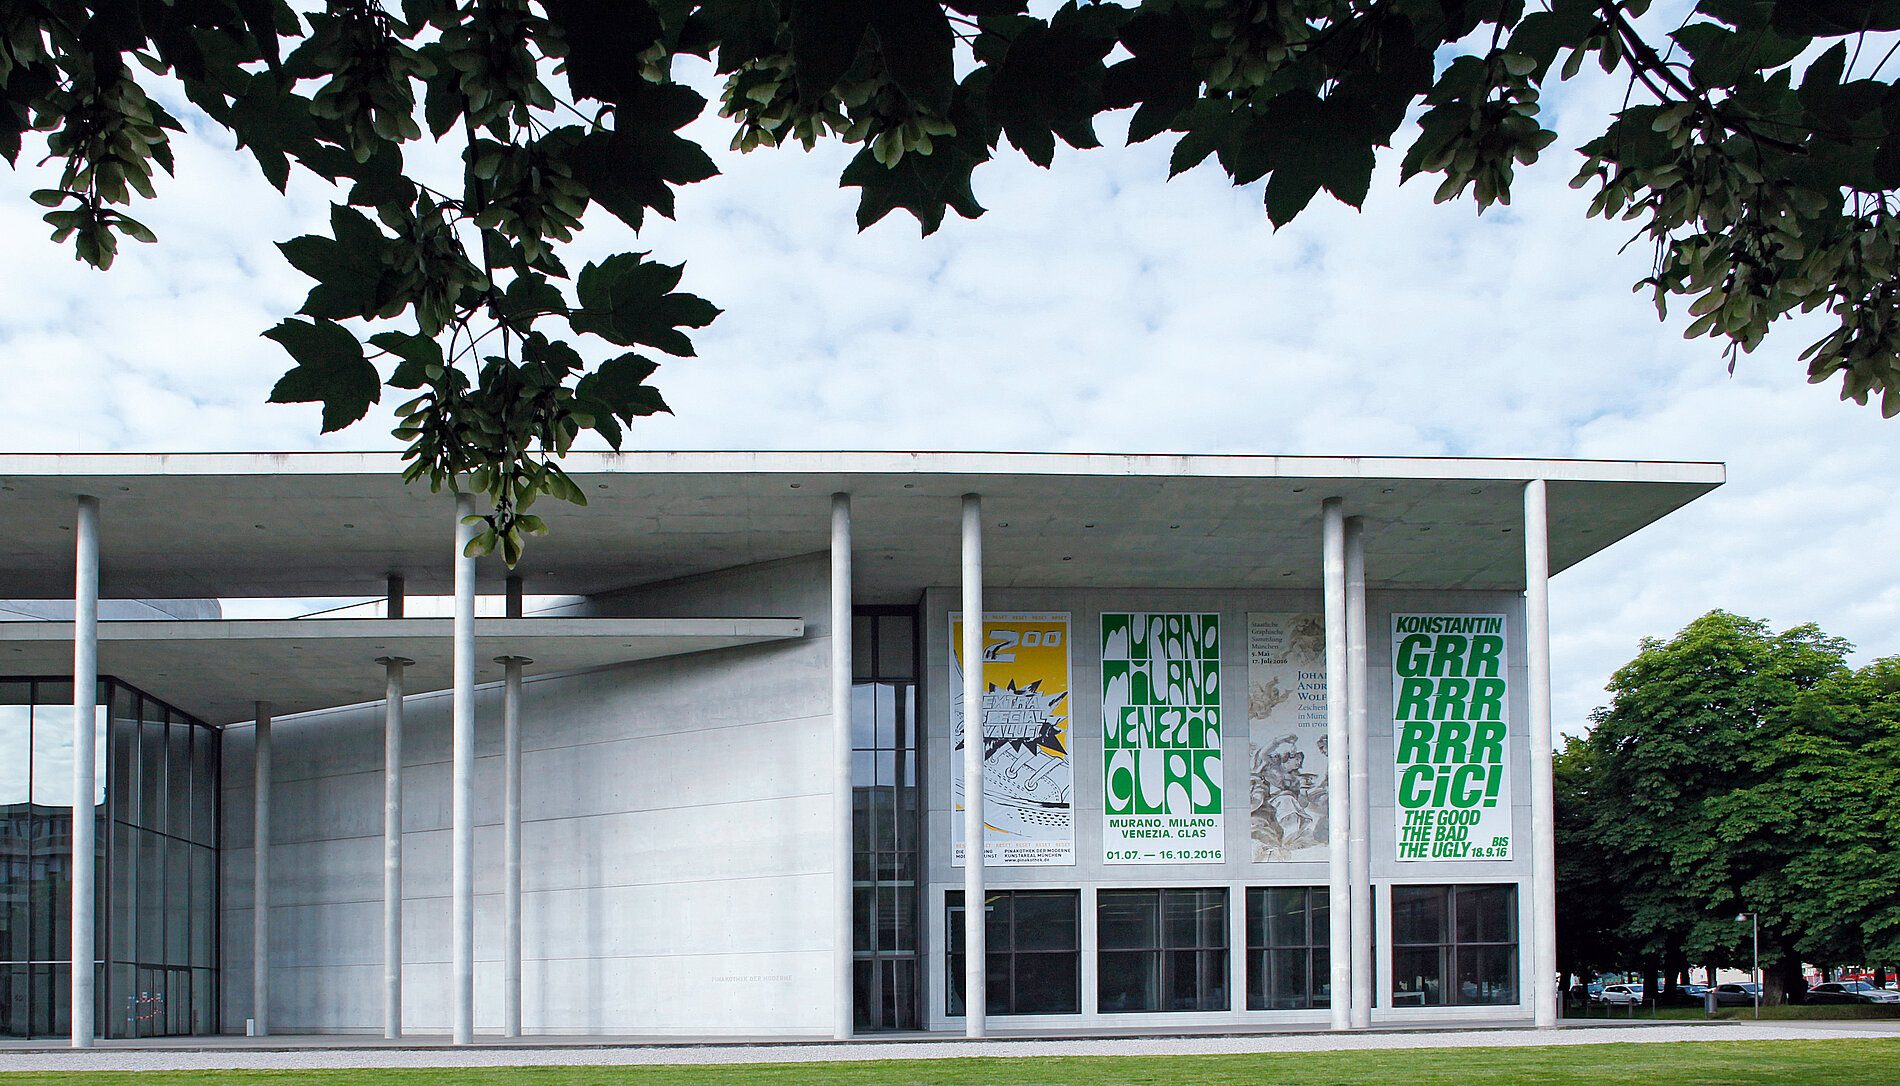 Exterior view of the Pinakothek der Moderne with 4 banners of the 4 museums. On the right, the banner for the exhibition "The Good, The Bad, The Ugly" in the Neue Sammlung, green on white.